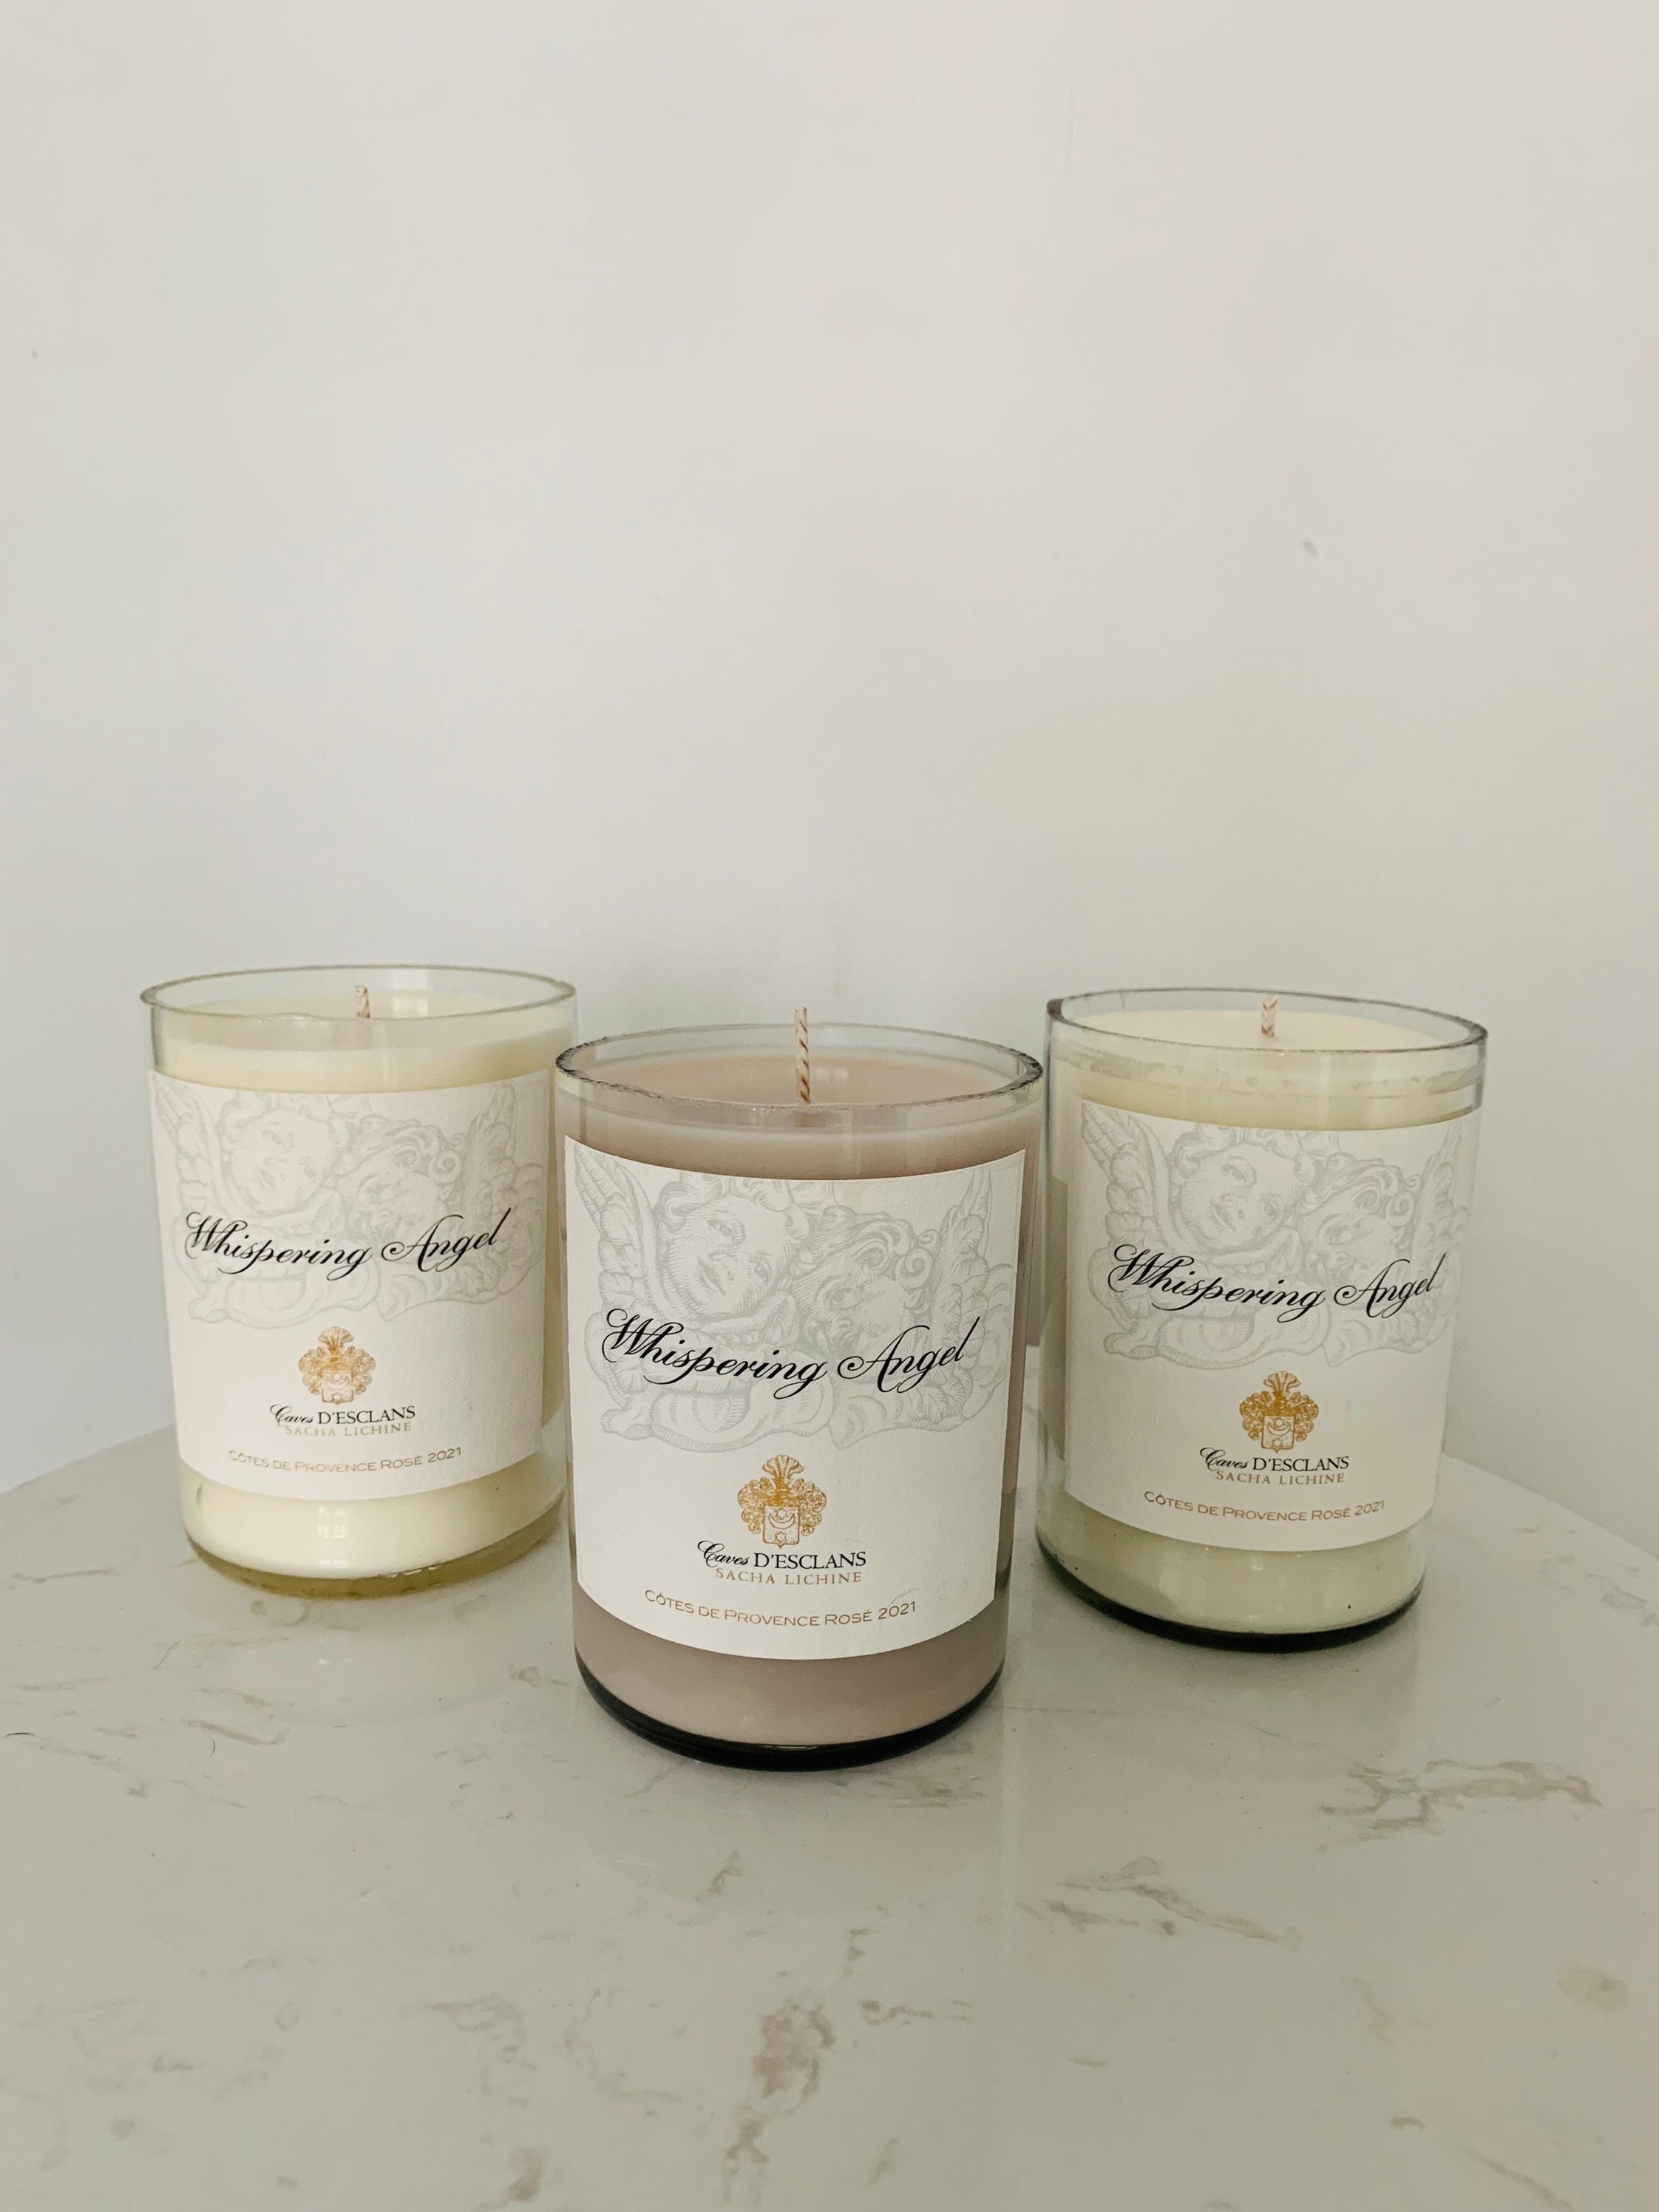 Norwegian Mist & Forest Pine, Soy Wax candle